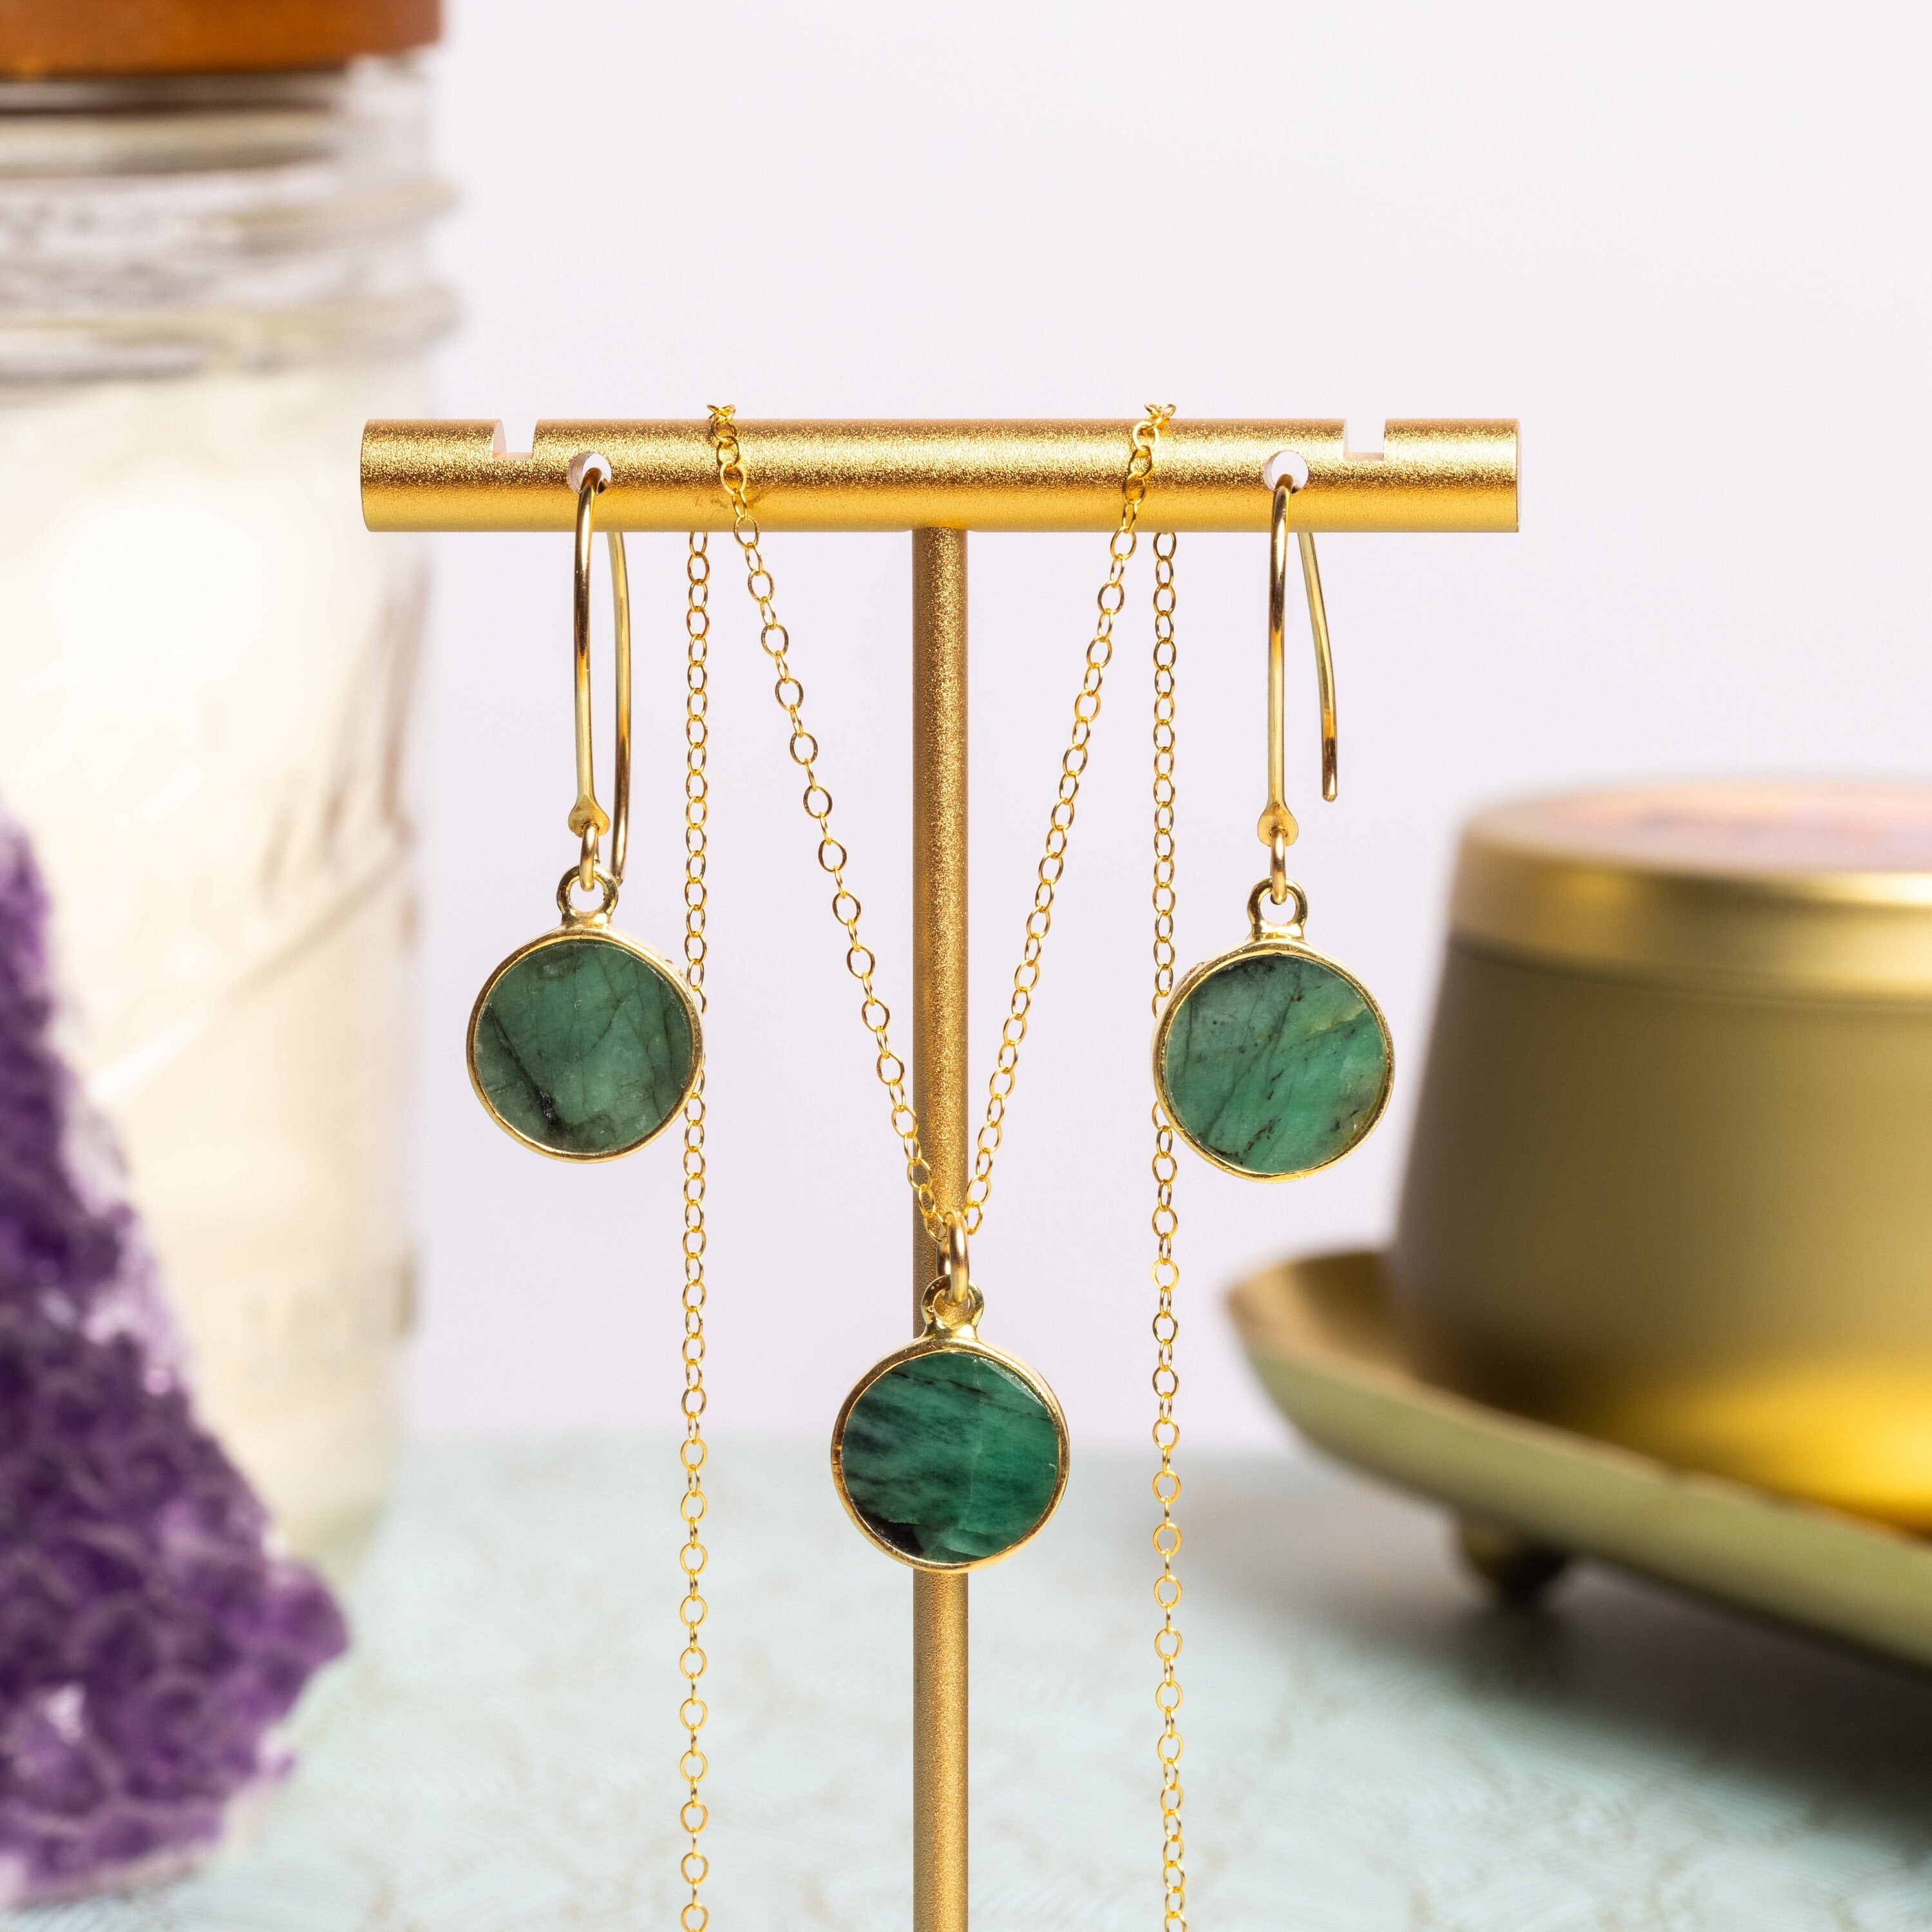 Raw Emerald Jewelry Set - Circle Pendant Necklace AND set of matching dangle earrings Necklace and Earrings Set Soul & Little Rose   